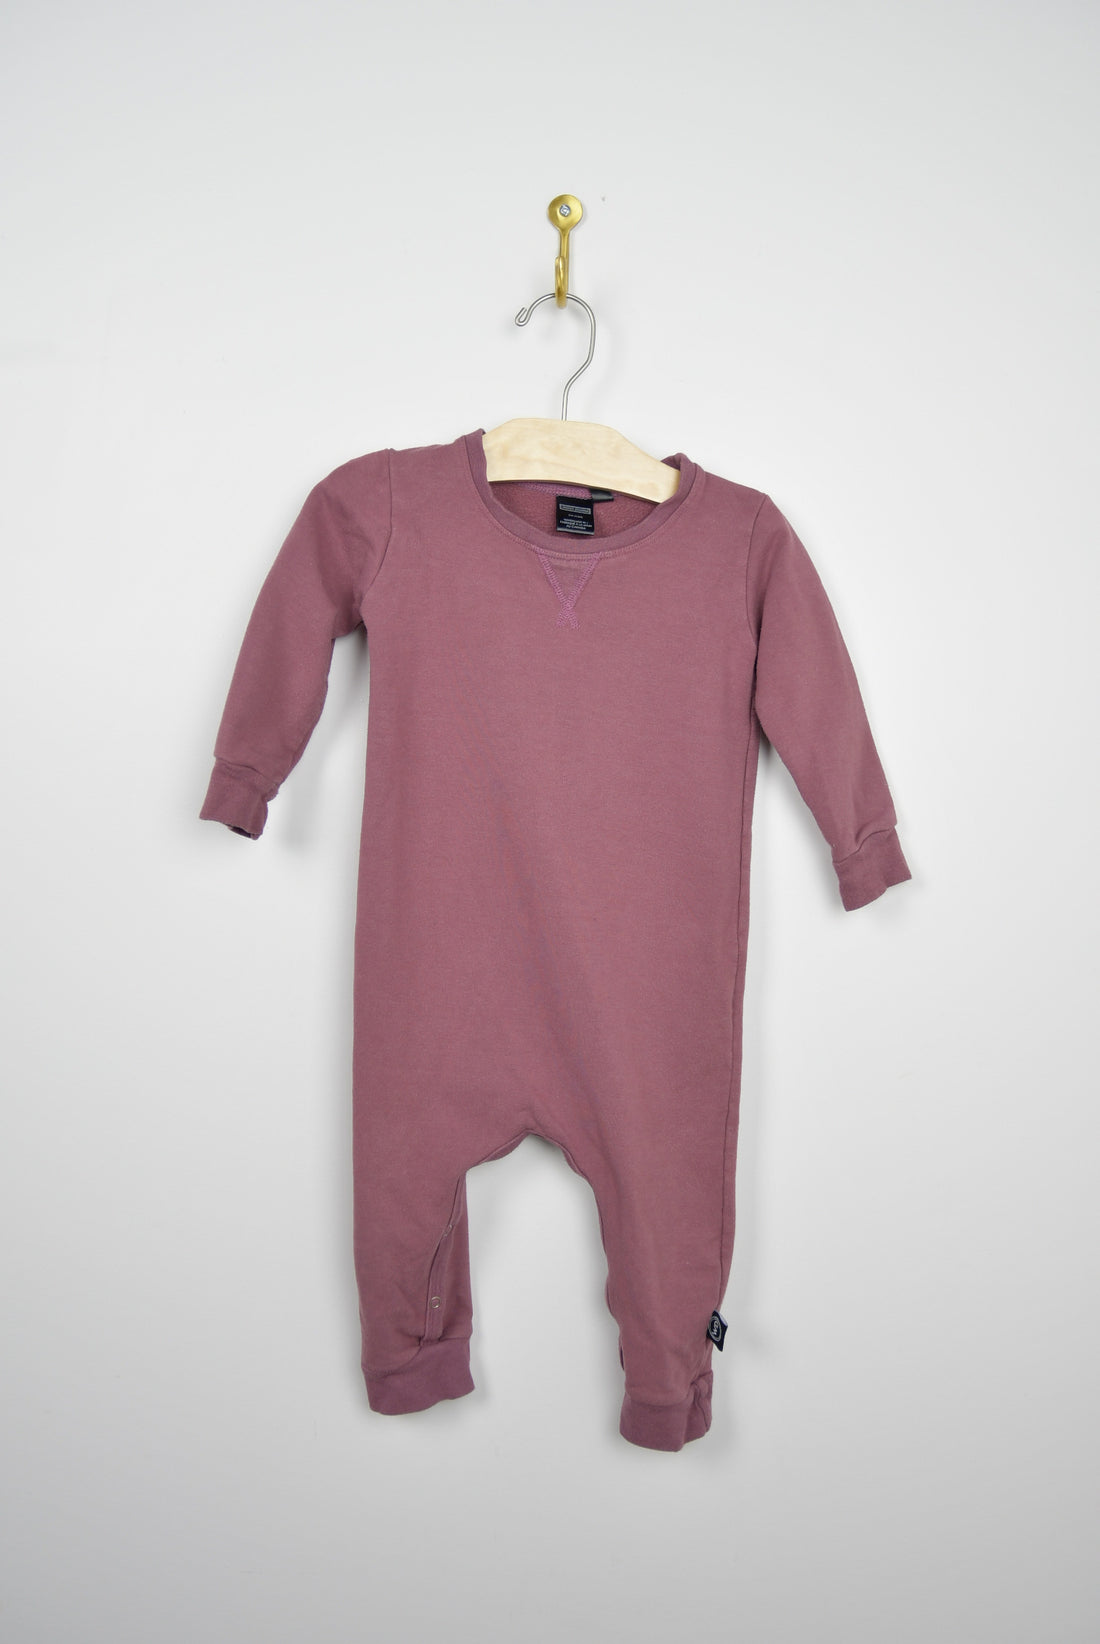 Wooly Doodle Wooly Doodle Wine Romper - 2T